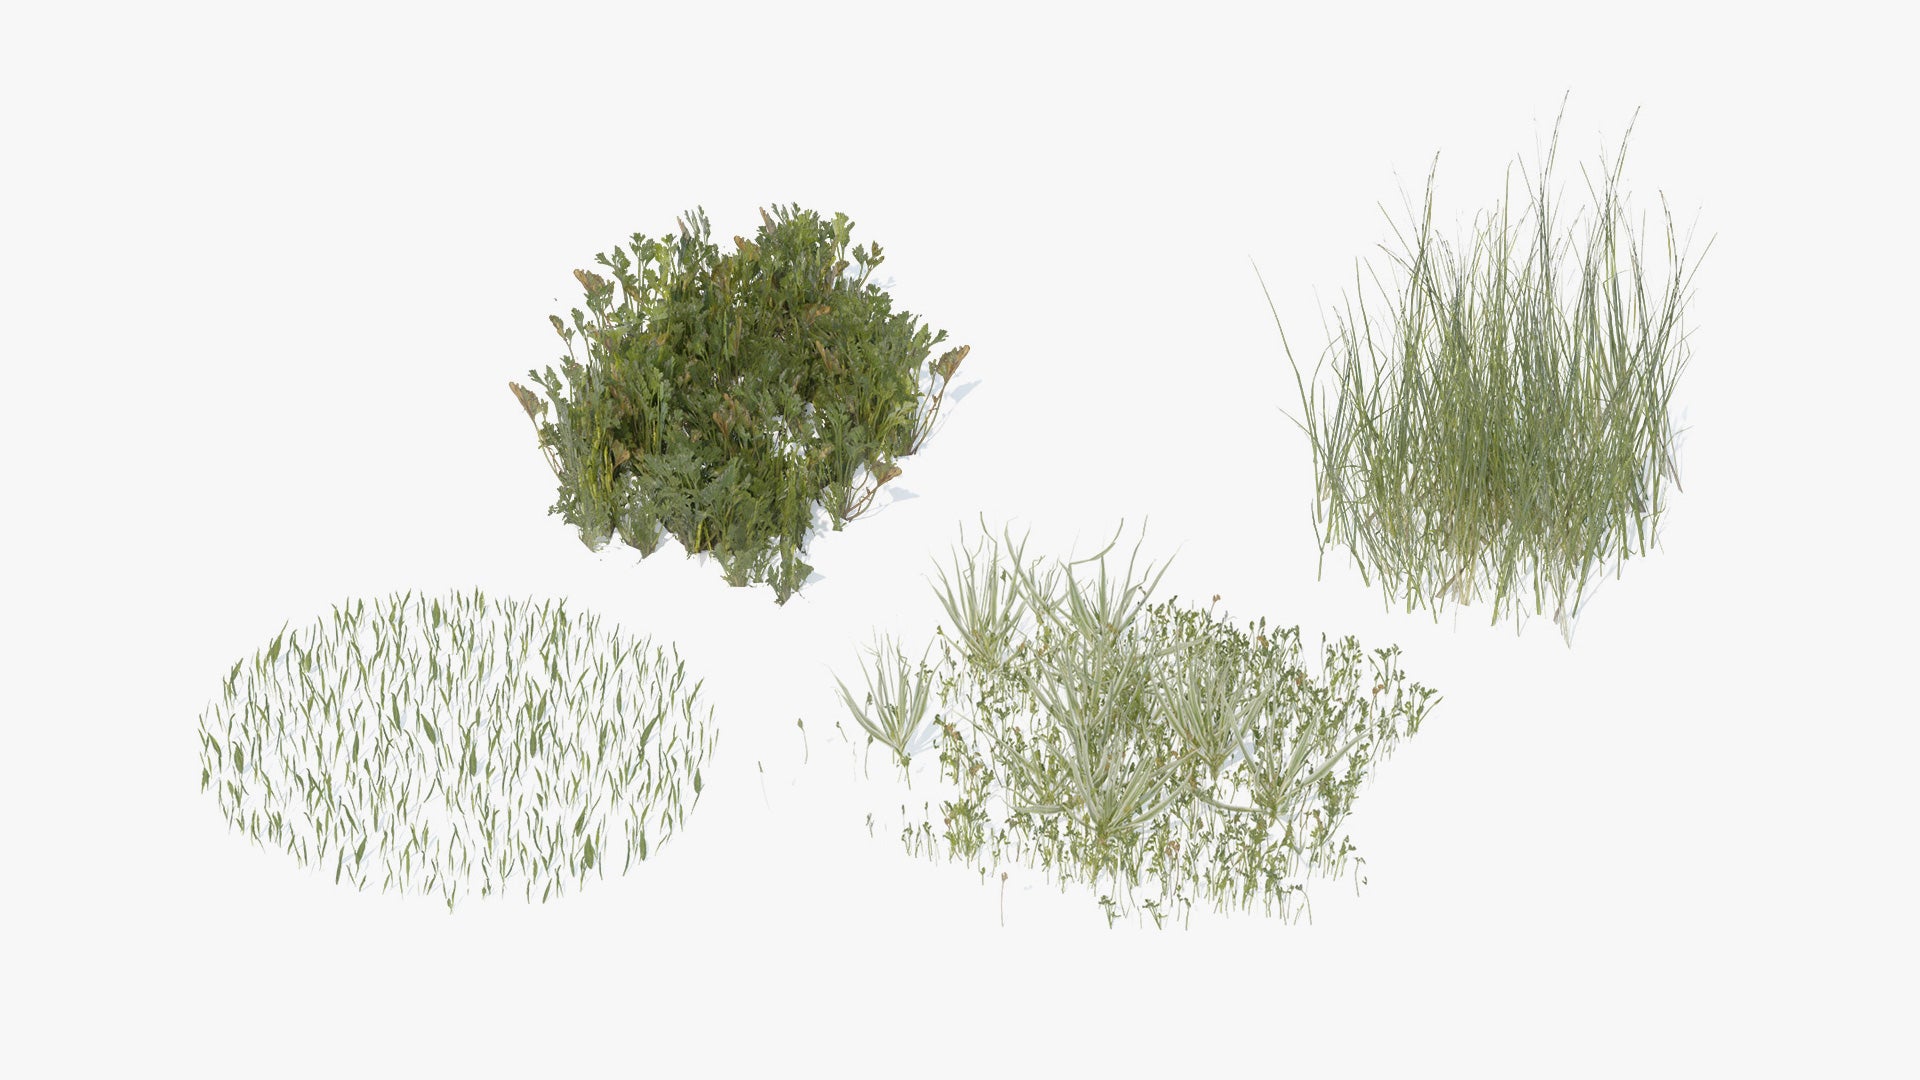 grass pack 3d model for Blender and OBJ, with PBR textures, mmesh cards and lowpoly